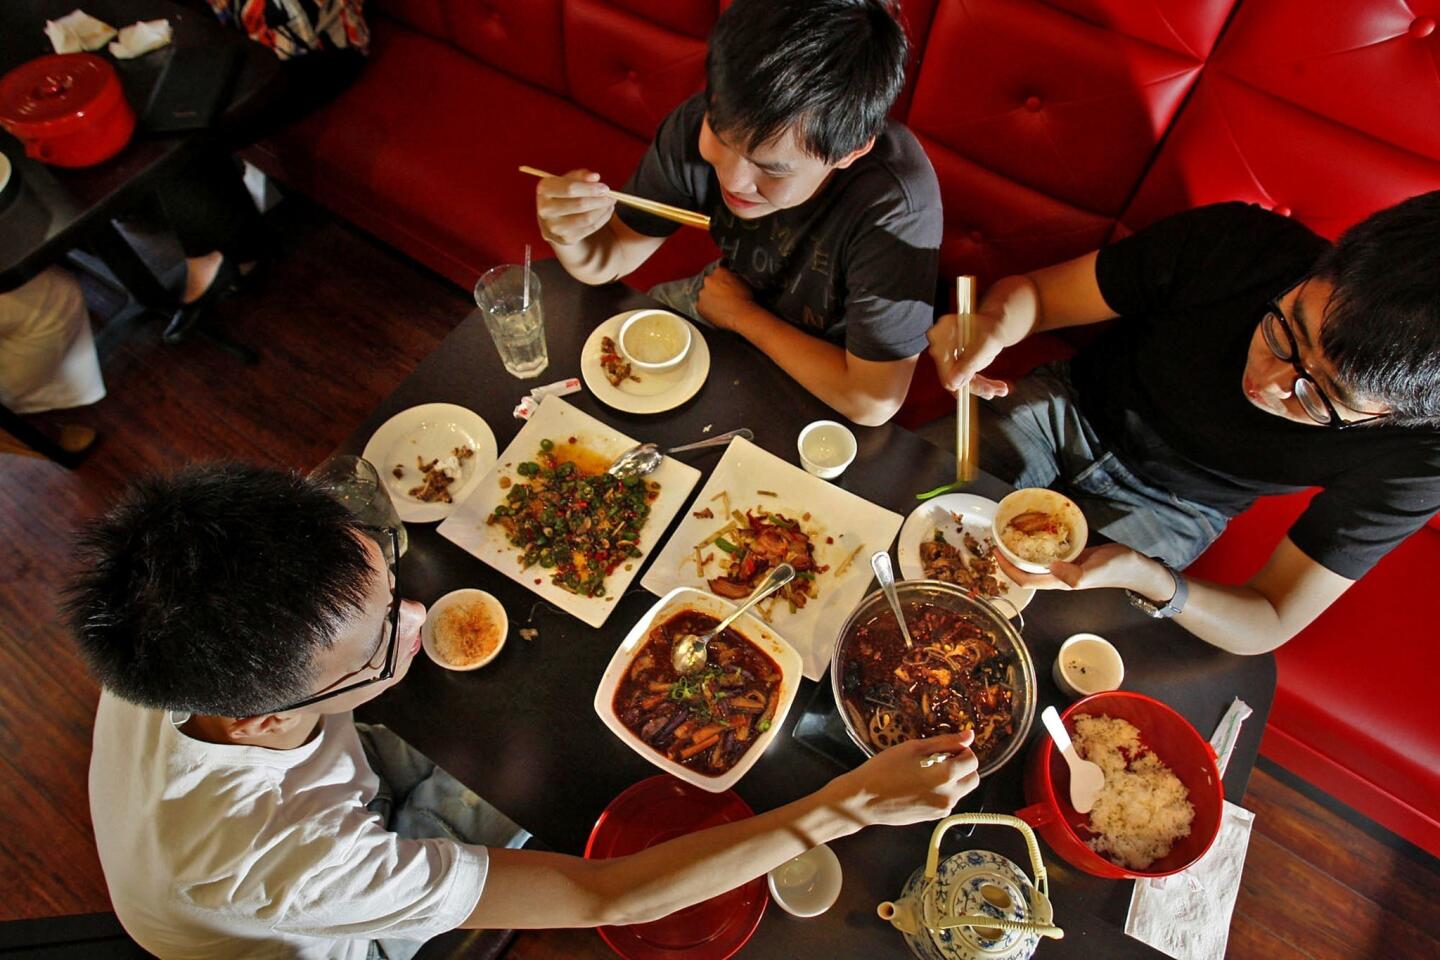 Architecture students Hao Wei, left, Pohsien Hou and Juihung Weng share dishes at lunch at Chengdu Taste in Alhambra. Chengdu Taste specializes in the Sichuan cooking of Chengdu.